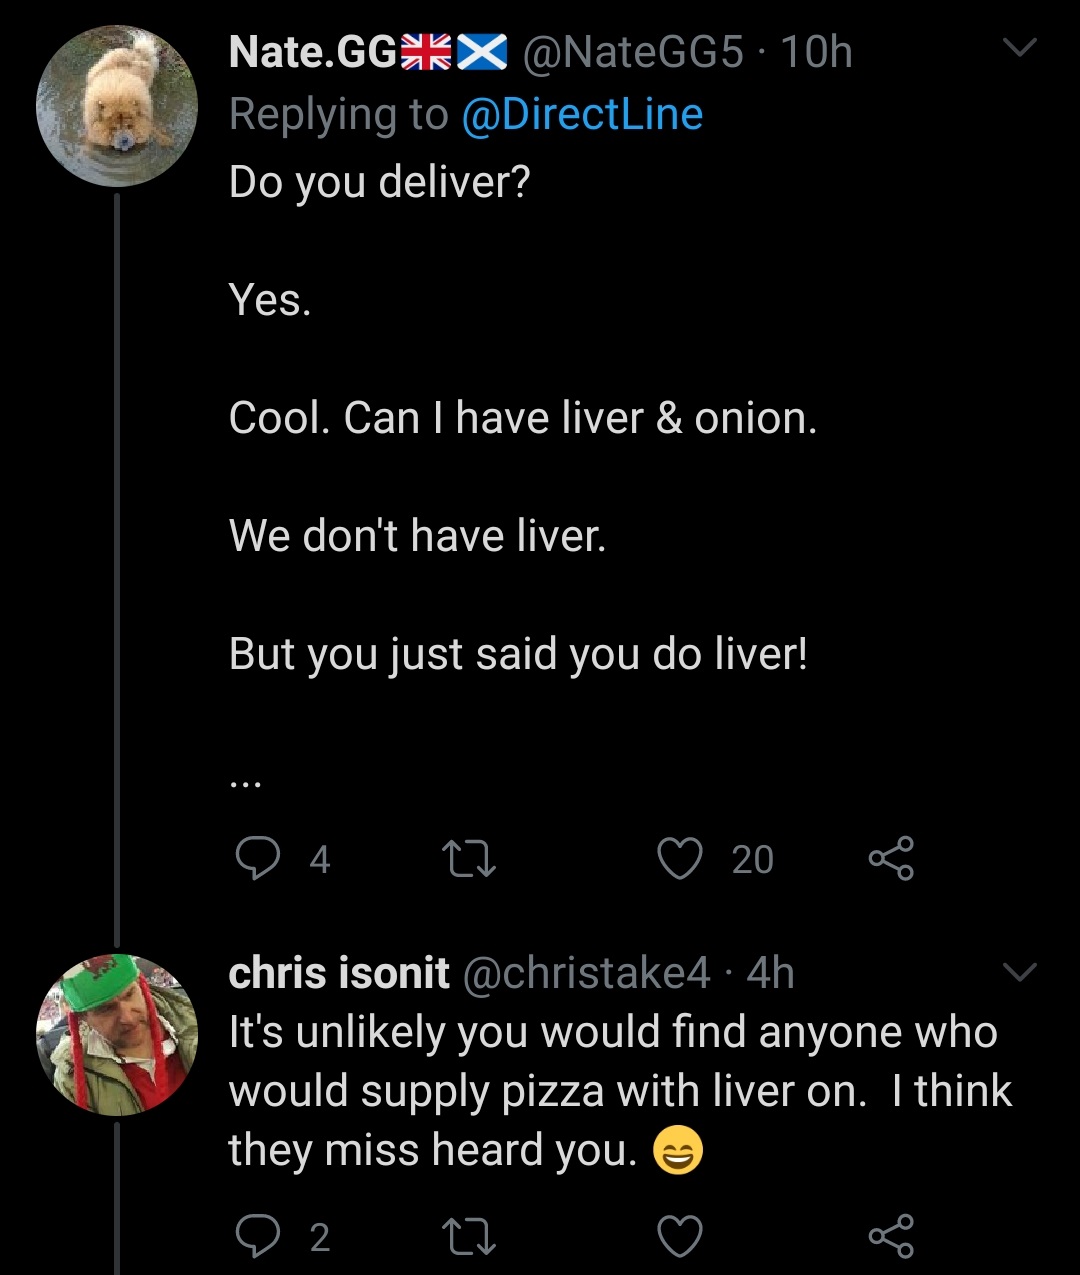 atmosphere - Nate.Ggakx 10h Do you deliver? Yes. Cool. Can I have liver & onion. We don't have liver. But you just said you do liver! 94 27 20 8 chris isonit 4h It's unly you would find anyone who would supply pizza with liver on. I think they miss heard 